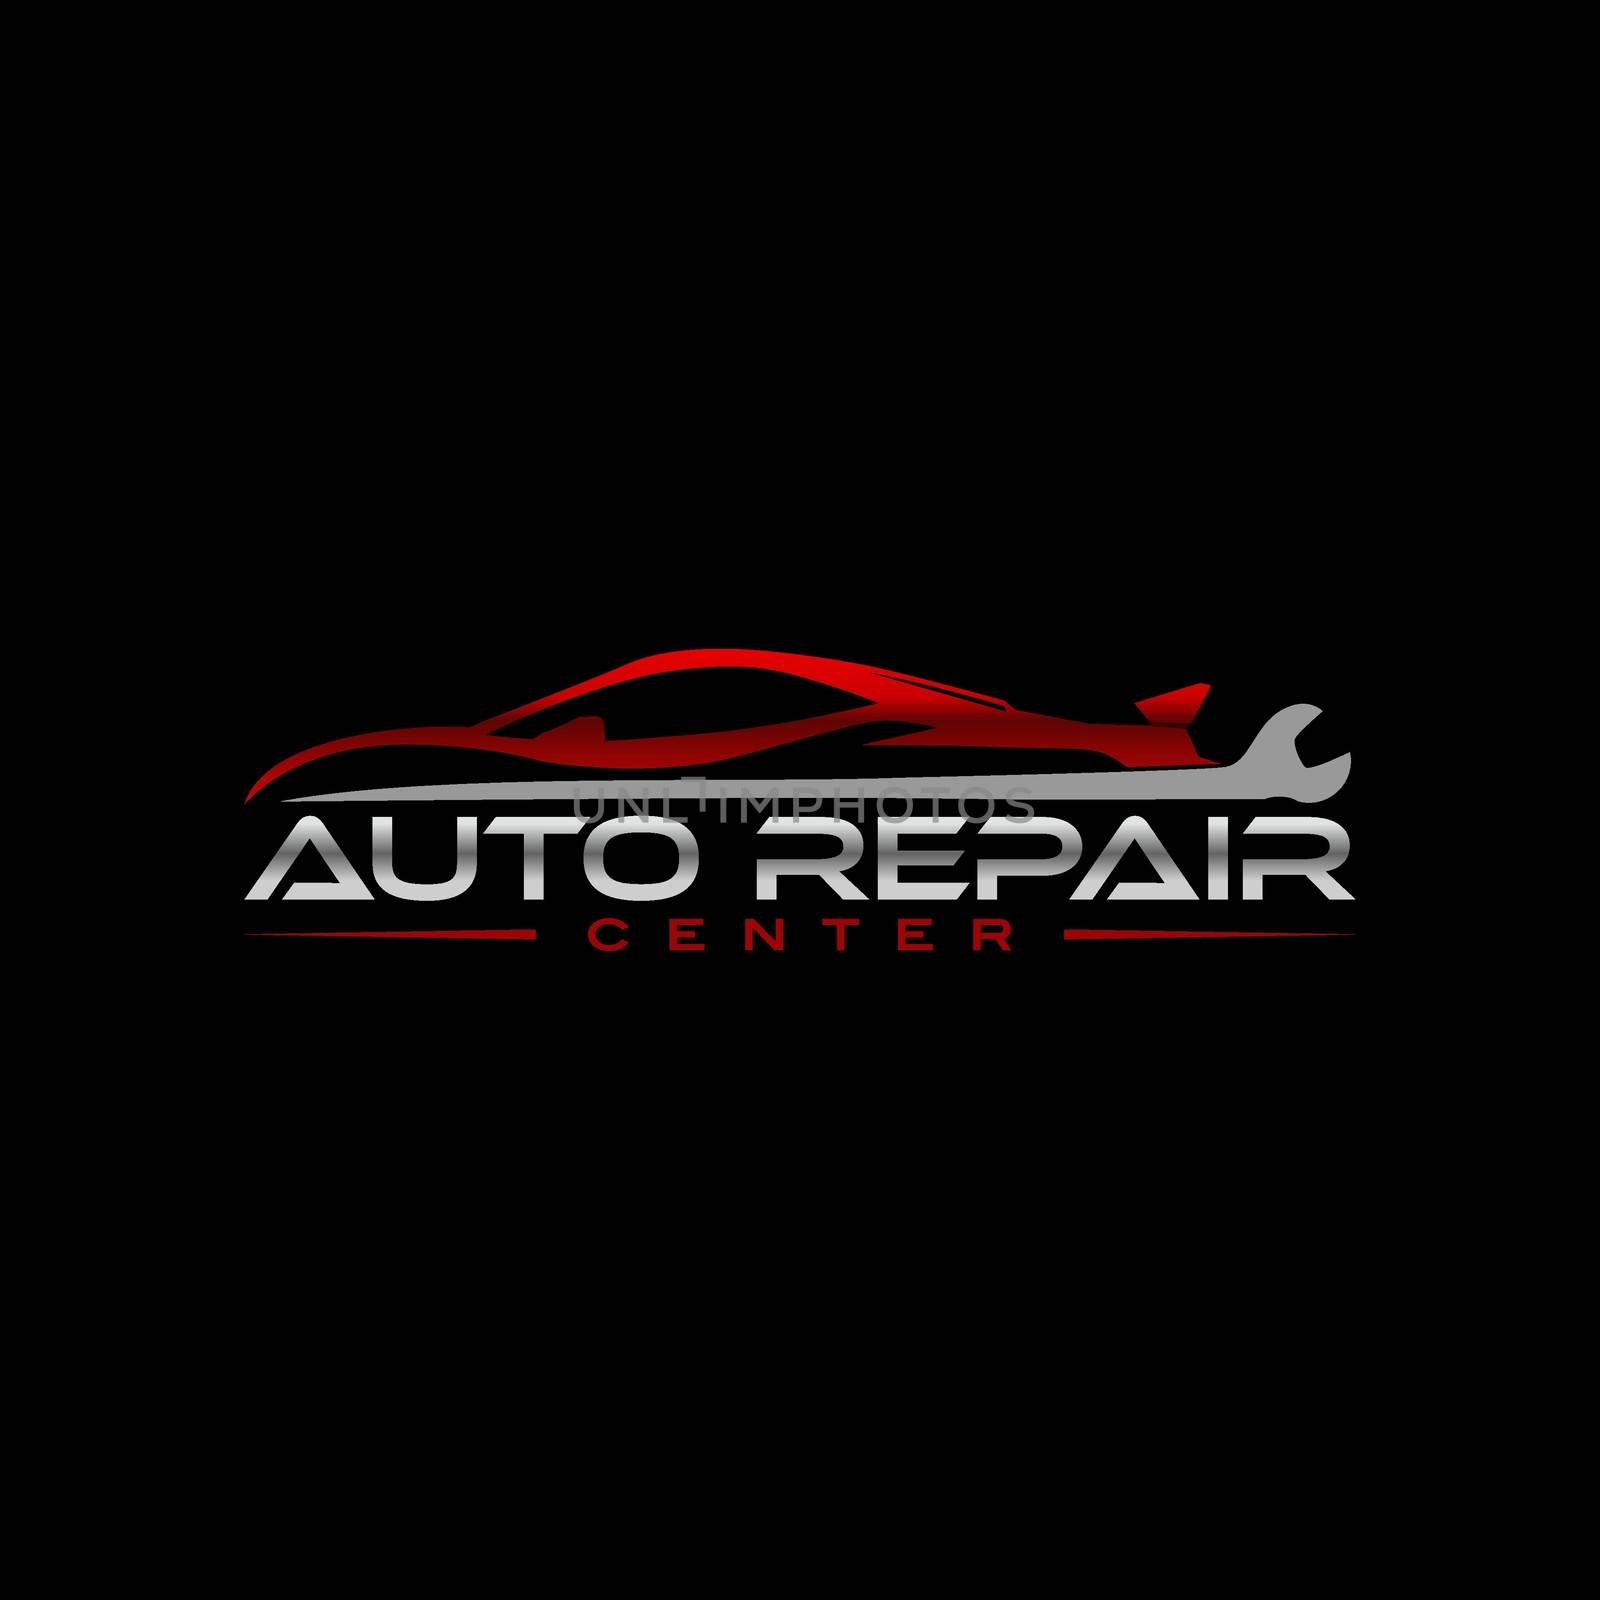 auto car repair service logo concept. sportcar with wrench elements stock illustration by IreIru